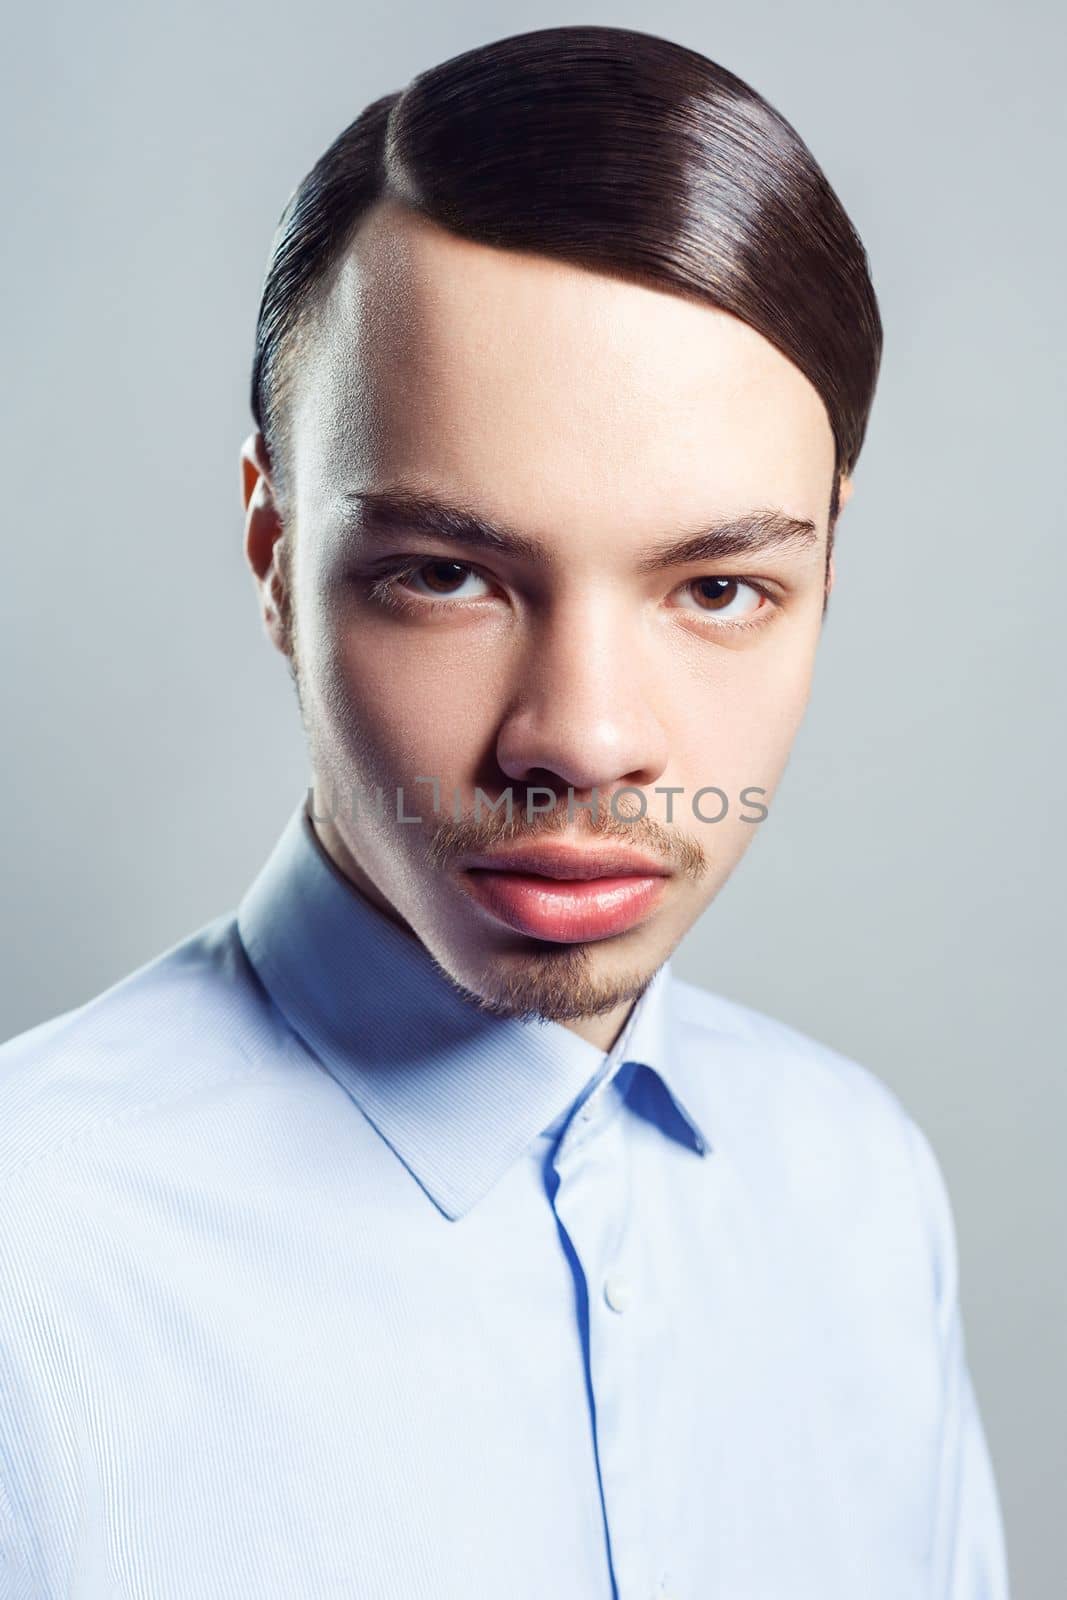 Portrait of young attractive handsome serious man with mustache with retro classic hairstyle, looking at camera, wearing blue shirt. Indoor studio shot isolated on gray background.